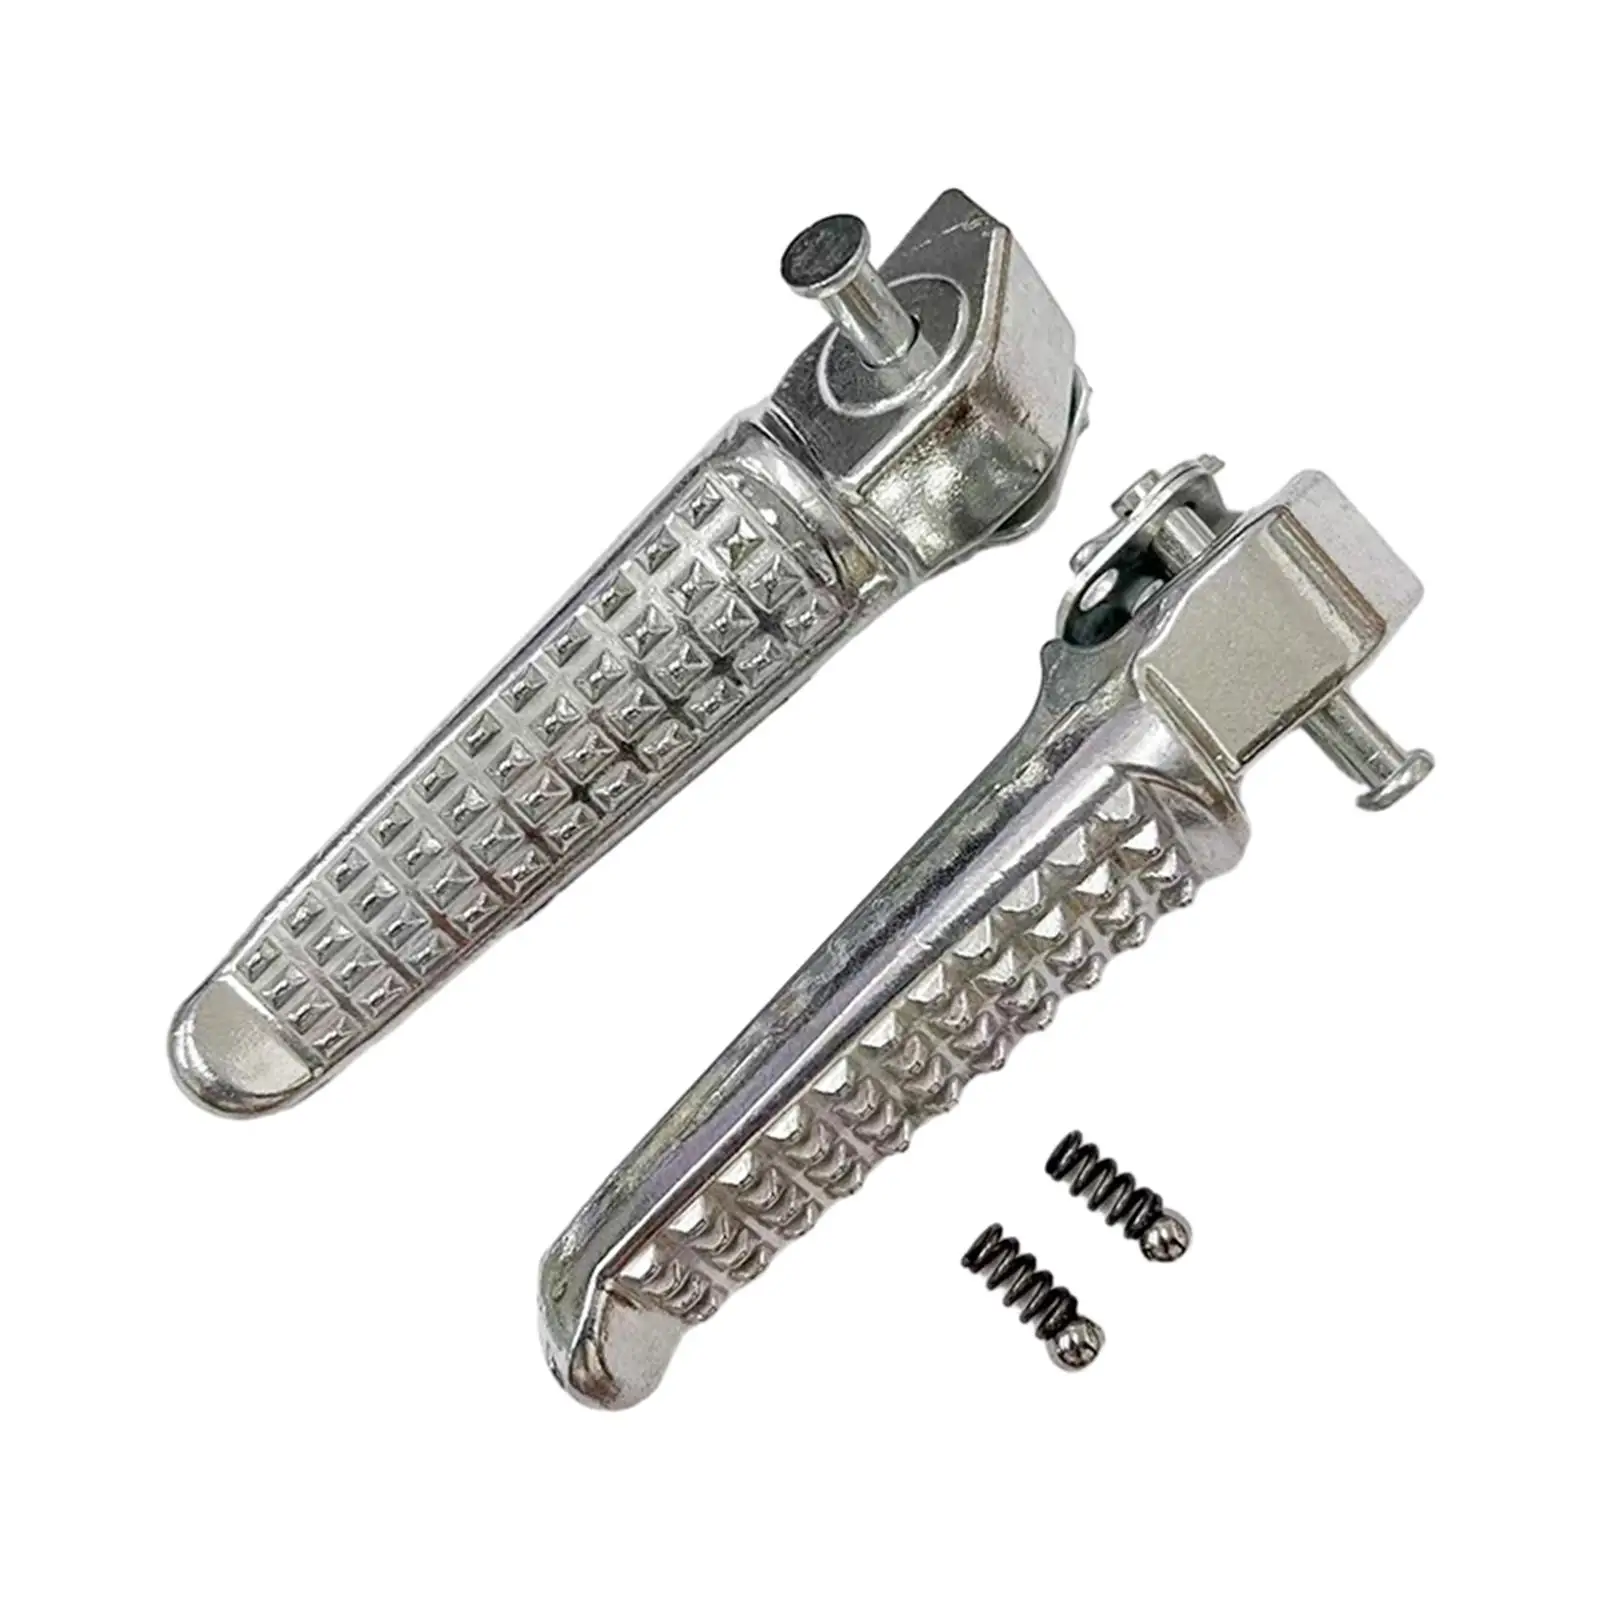 2 Pieces Motorcycle Rear Passenger Foot Pegs Spare Parts 115x18mm Universal